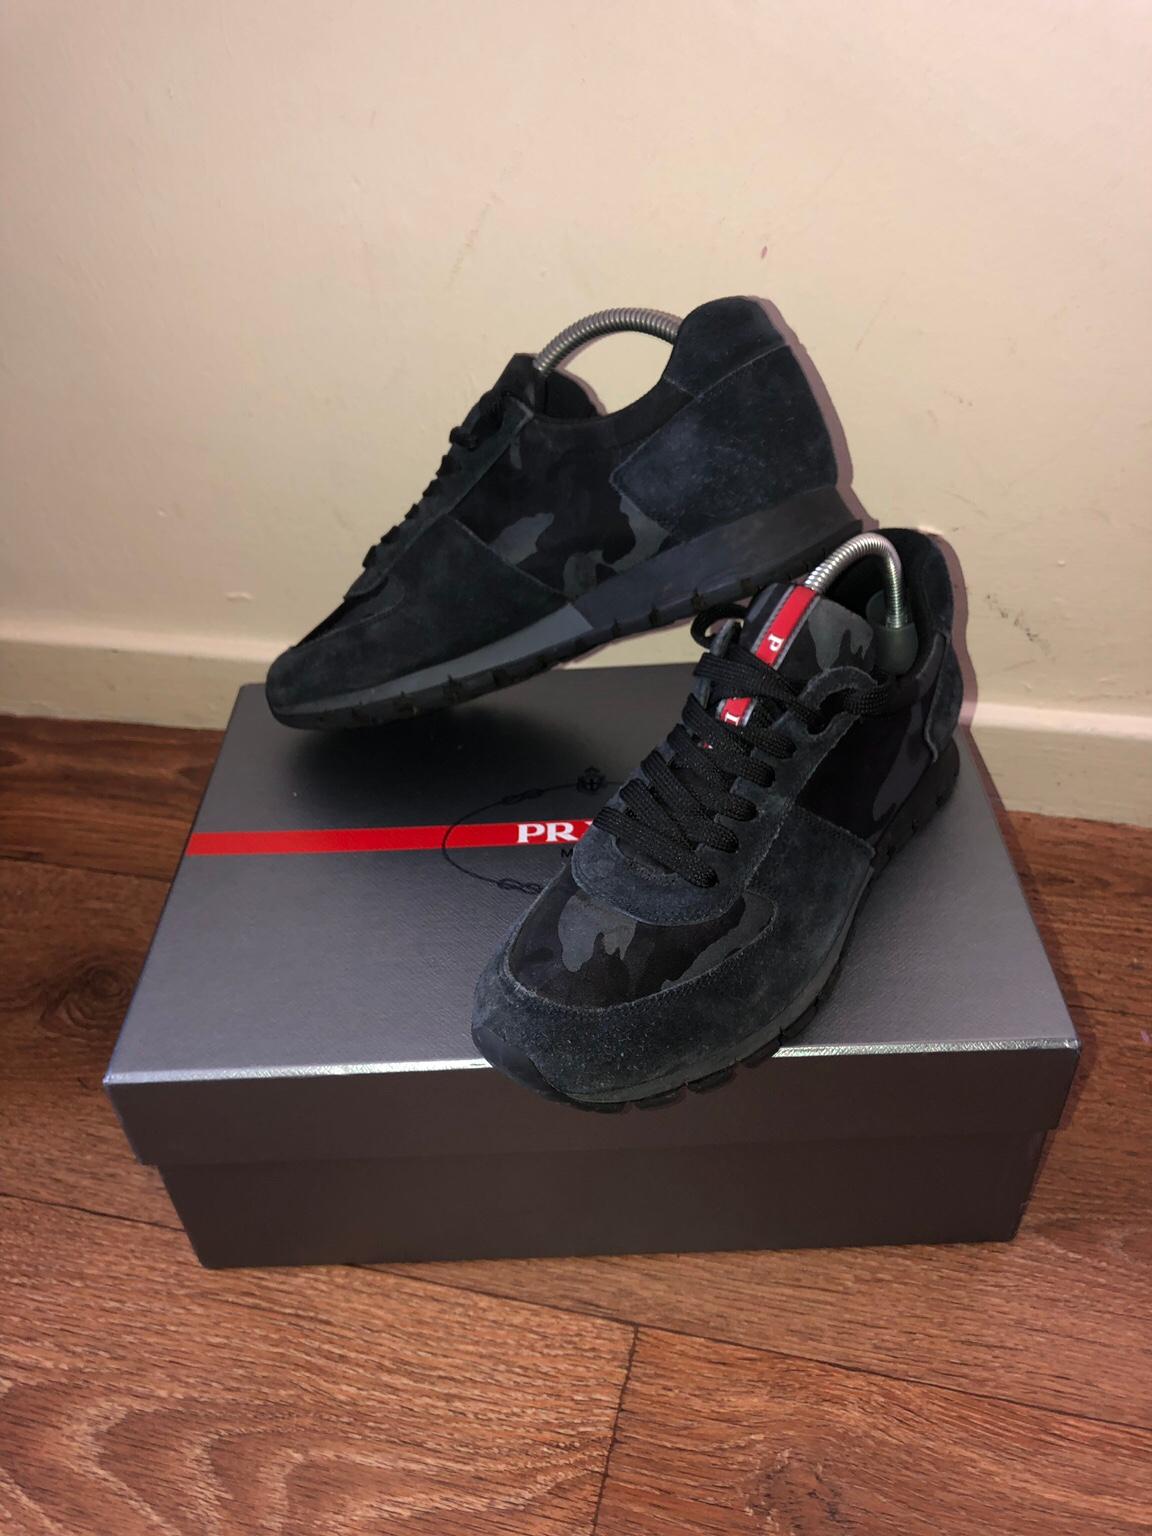 Prada runners camo in L1 Liverpool for 